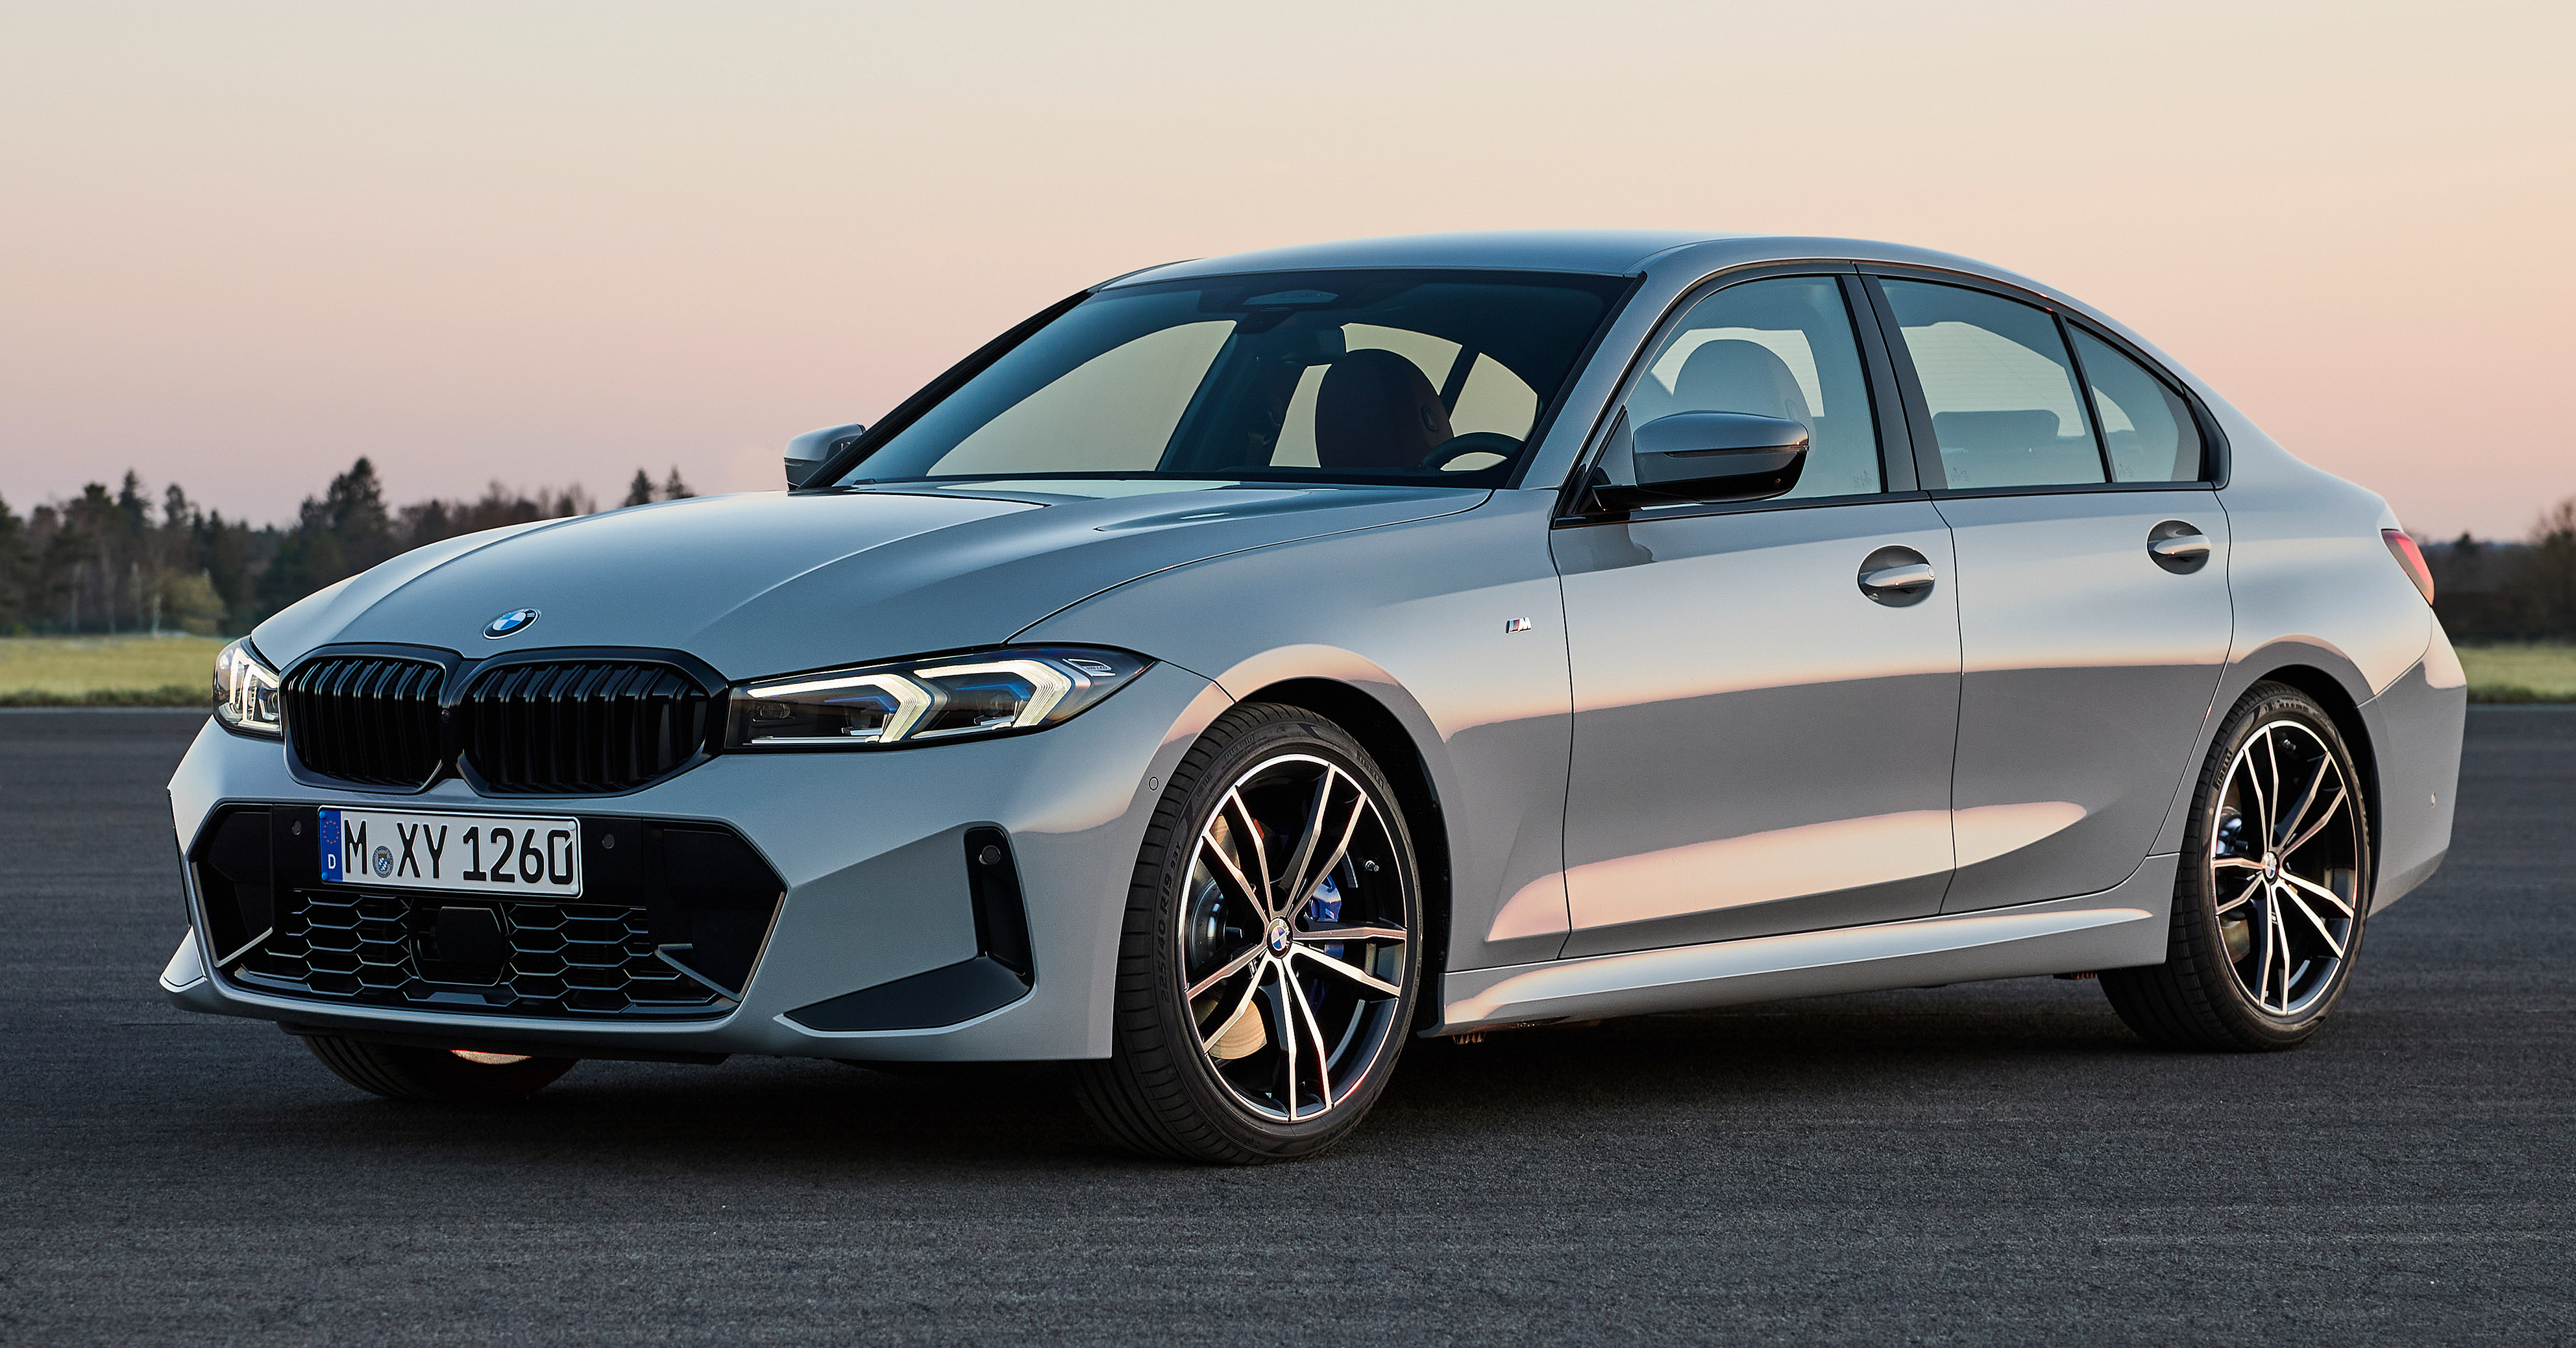 2022 BMW 3 Series facelift debuts - G20 LCI gets new headlamps